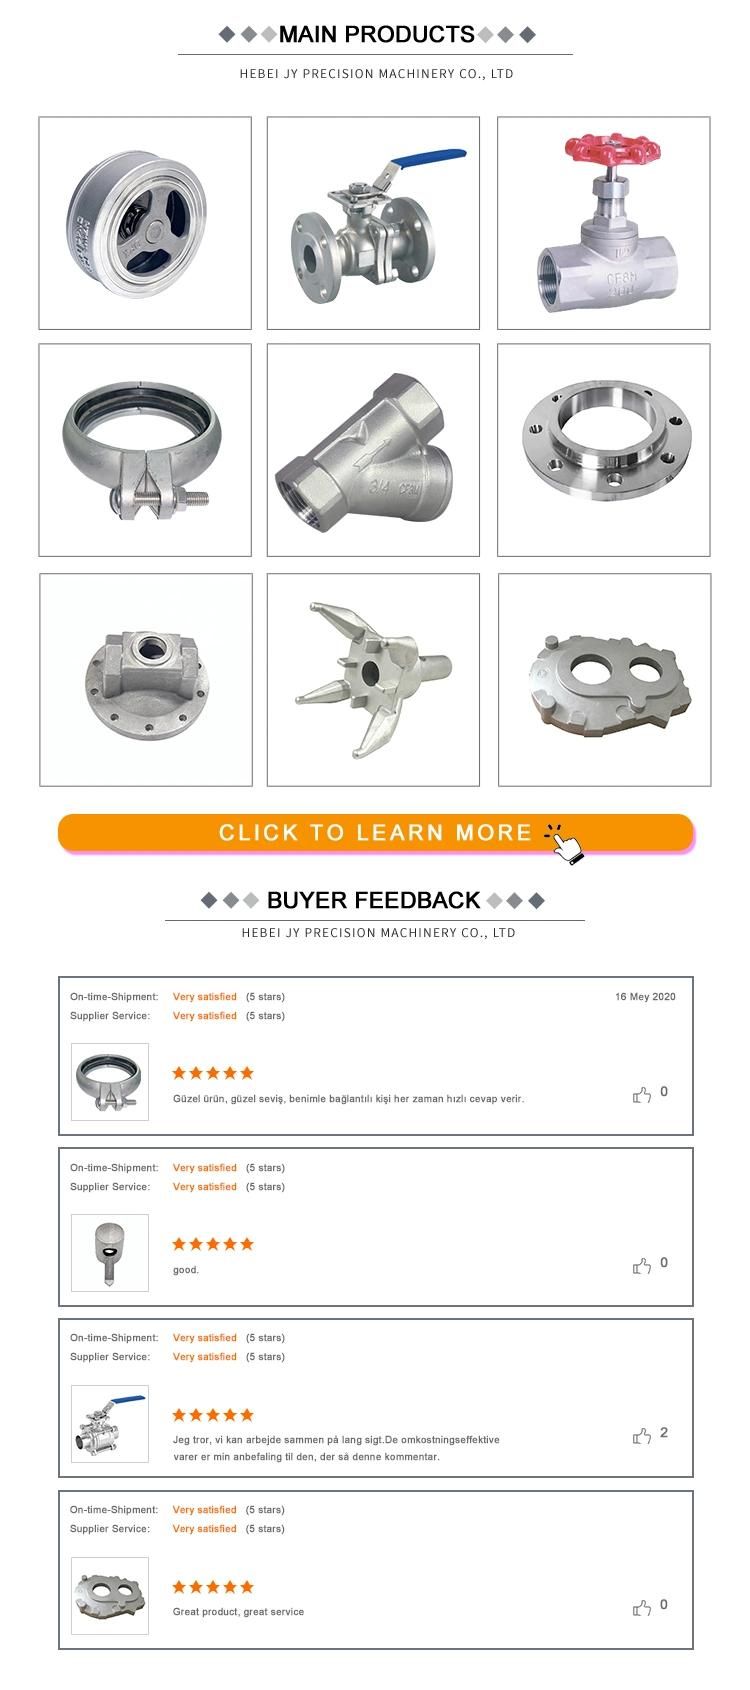 OEM Factory Stainless Steel High Precision Customized Design CNC Machine Investment Casting Products for Machine Accessories